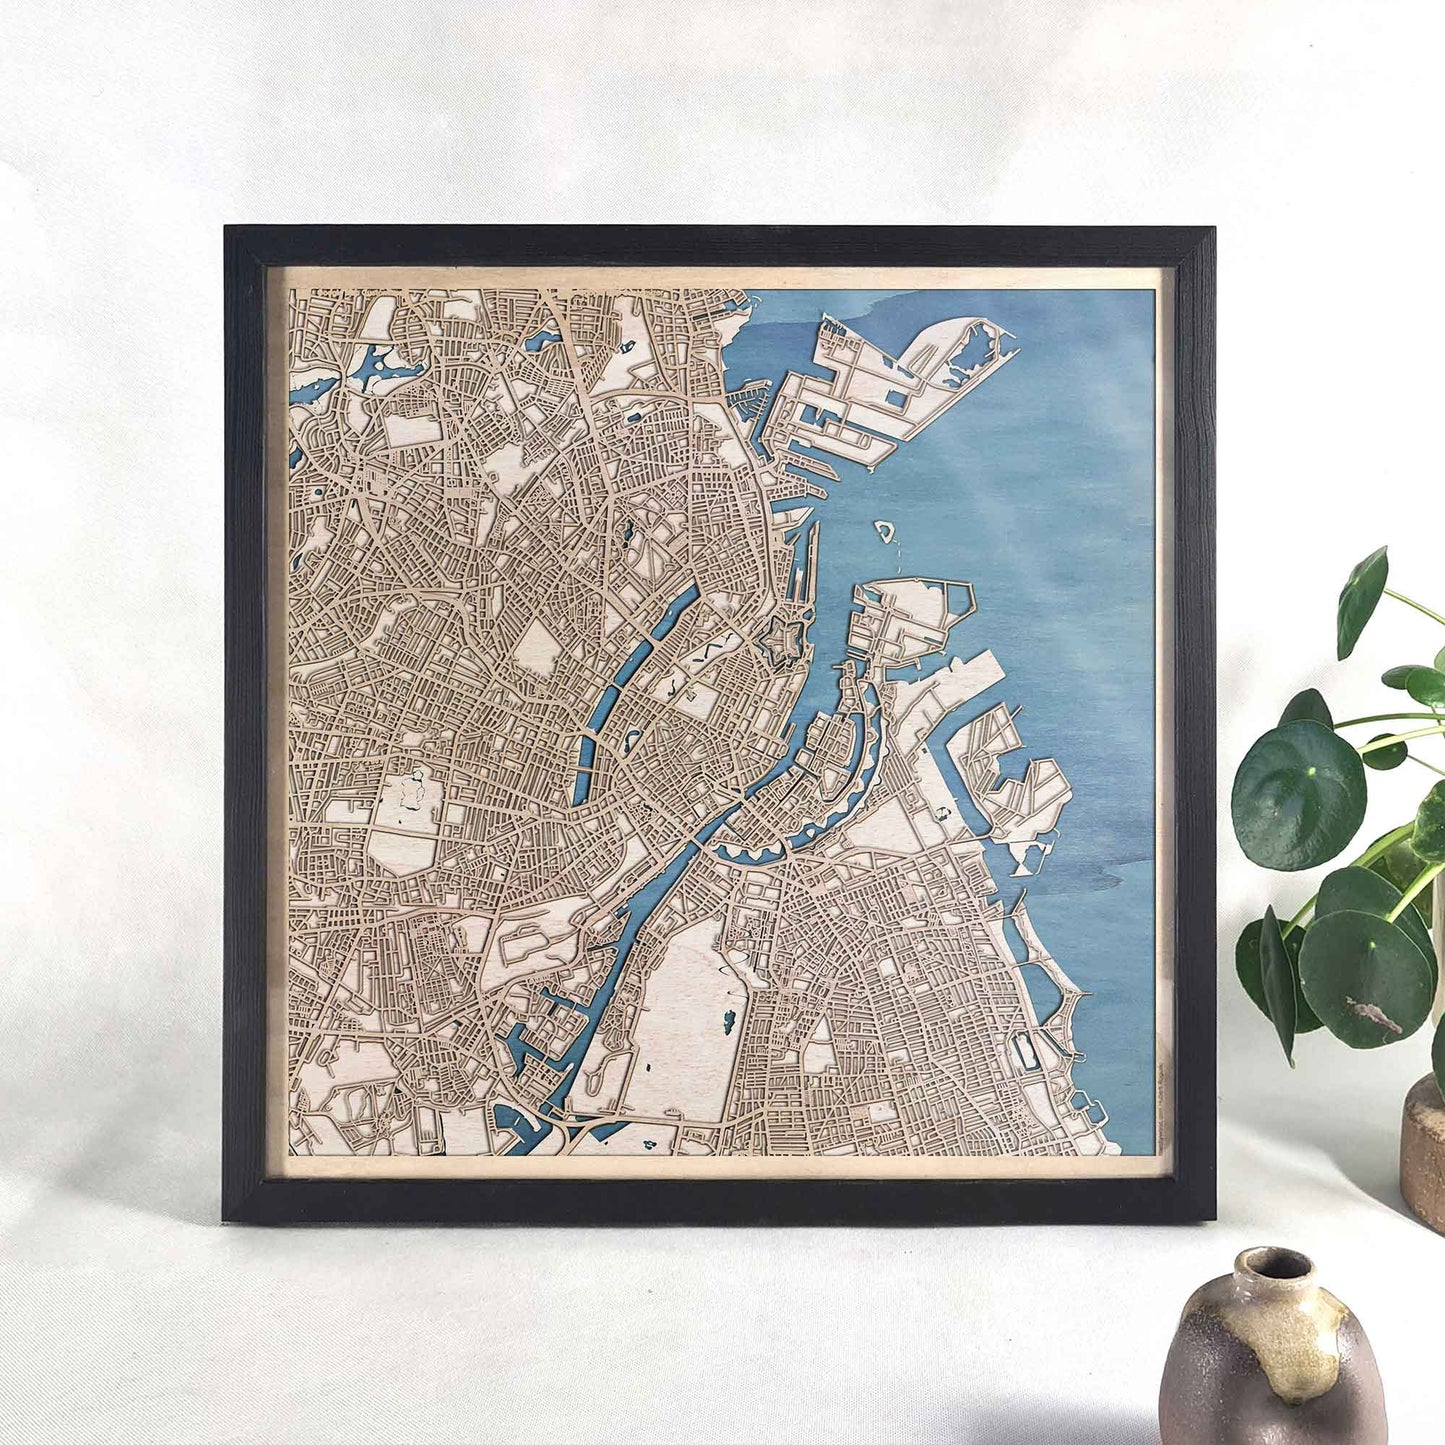 Copenhagen Wooden Map by CityWood - Custom Wood Map Art - Unique Laser Cut Engraved - Anniversary Gift